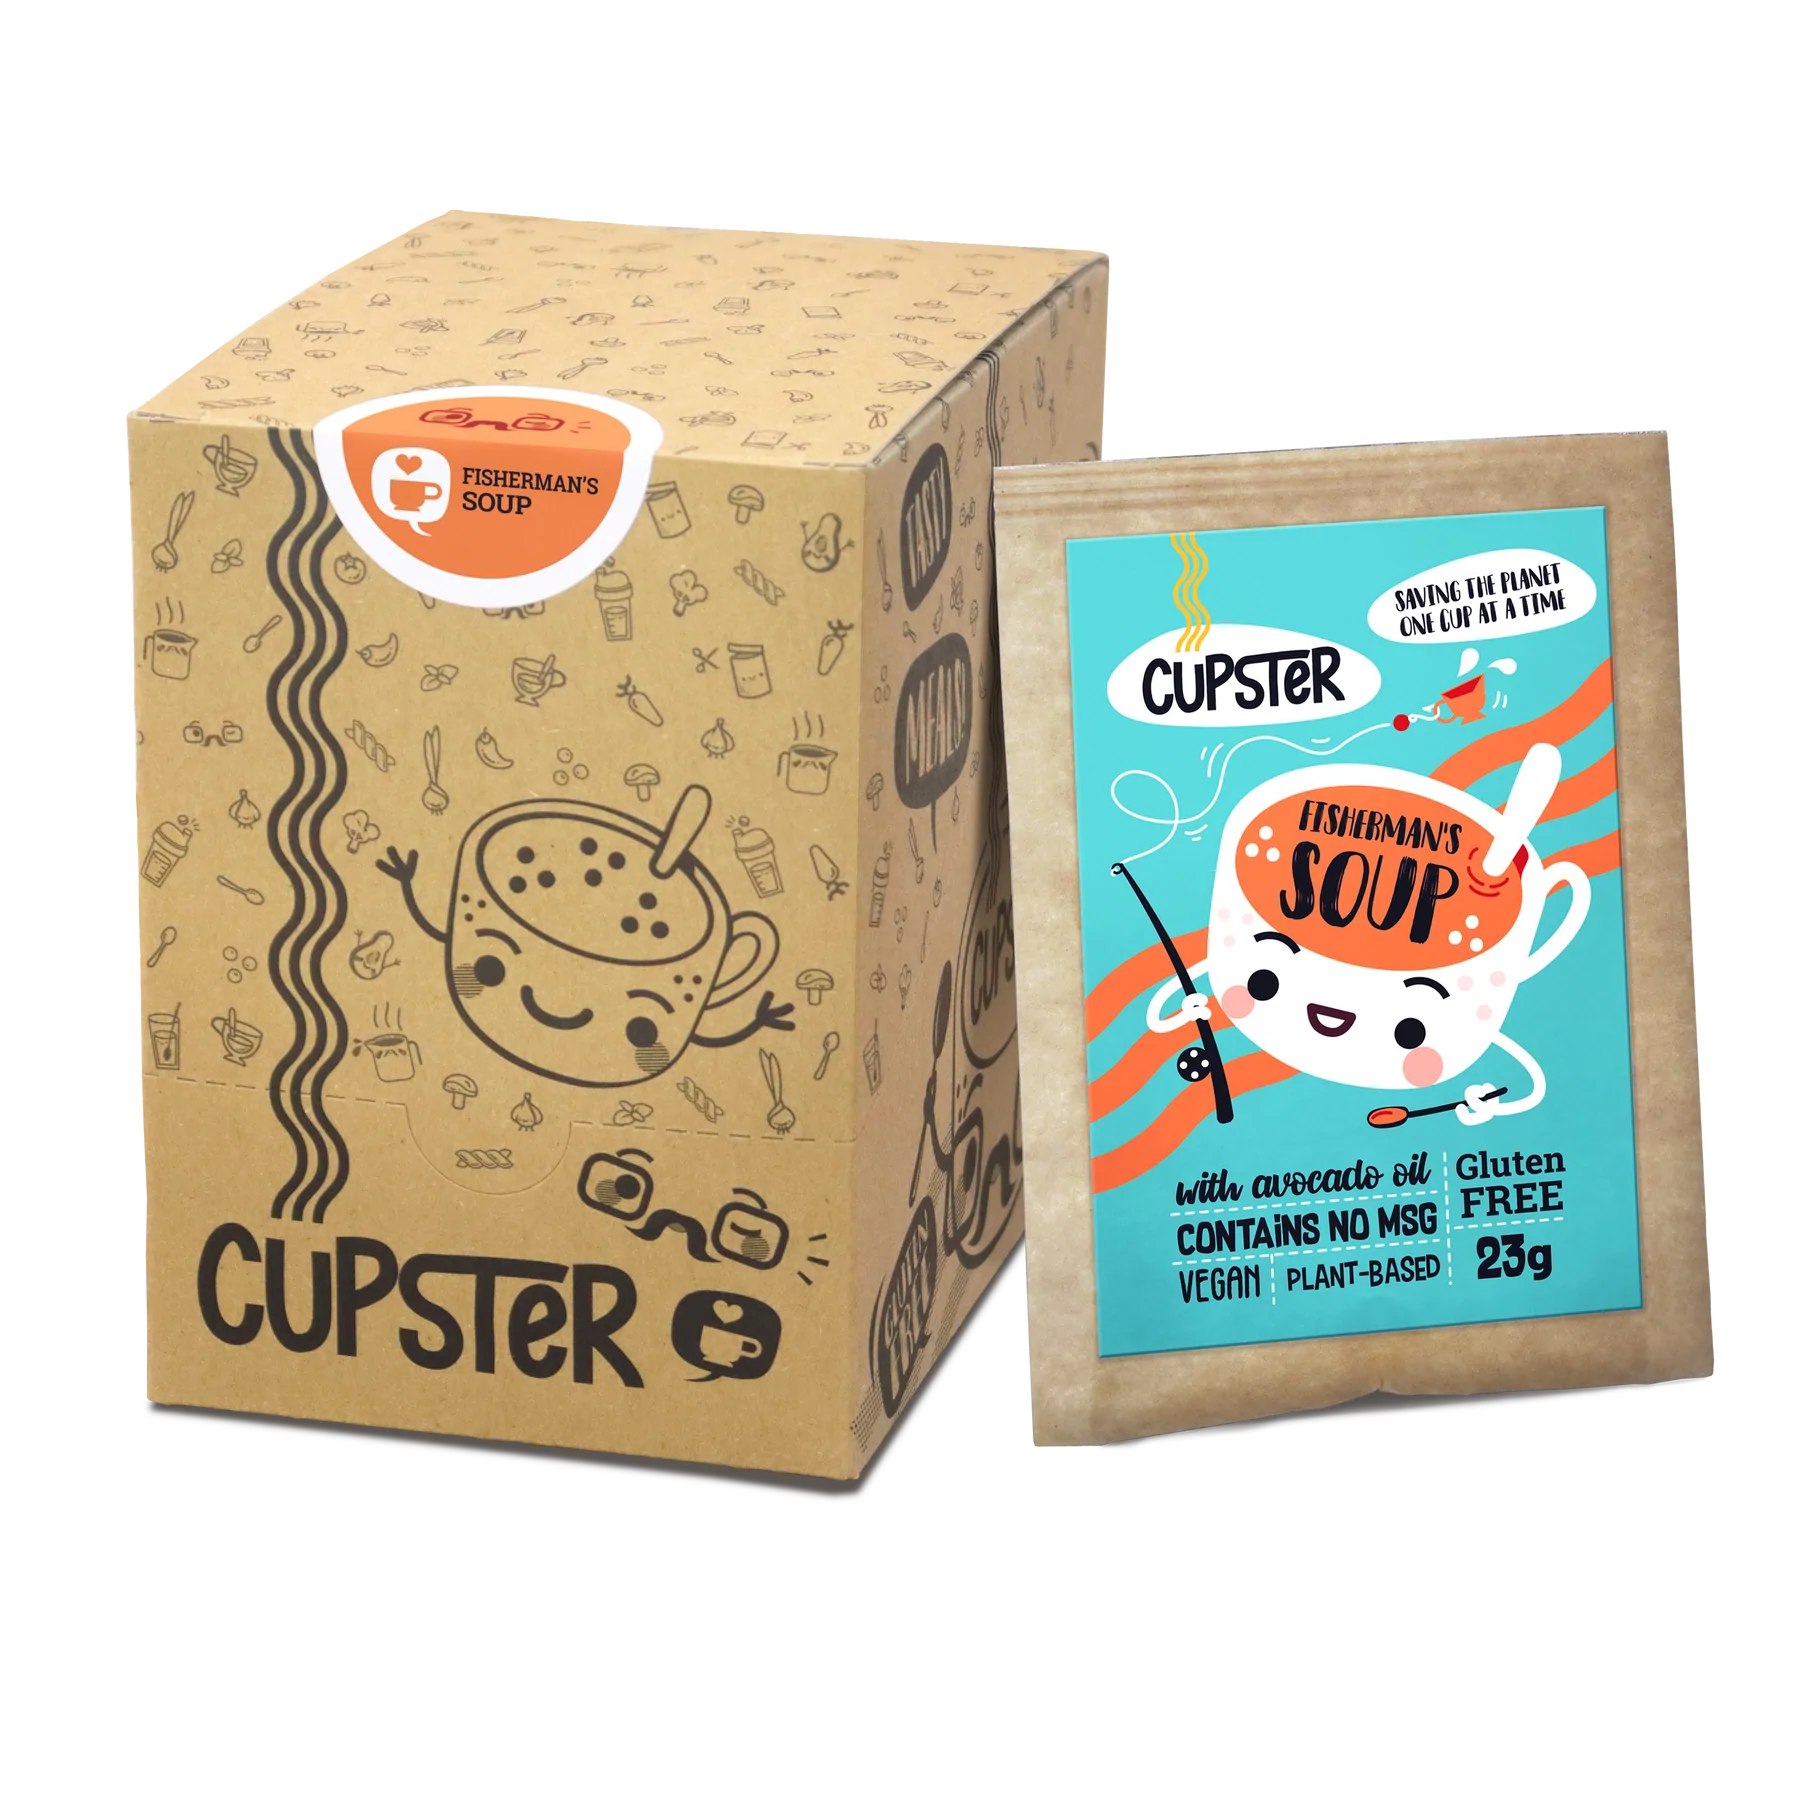 Cupster instant folyami leves 10x23g